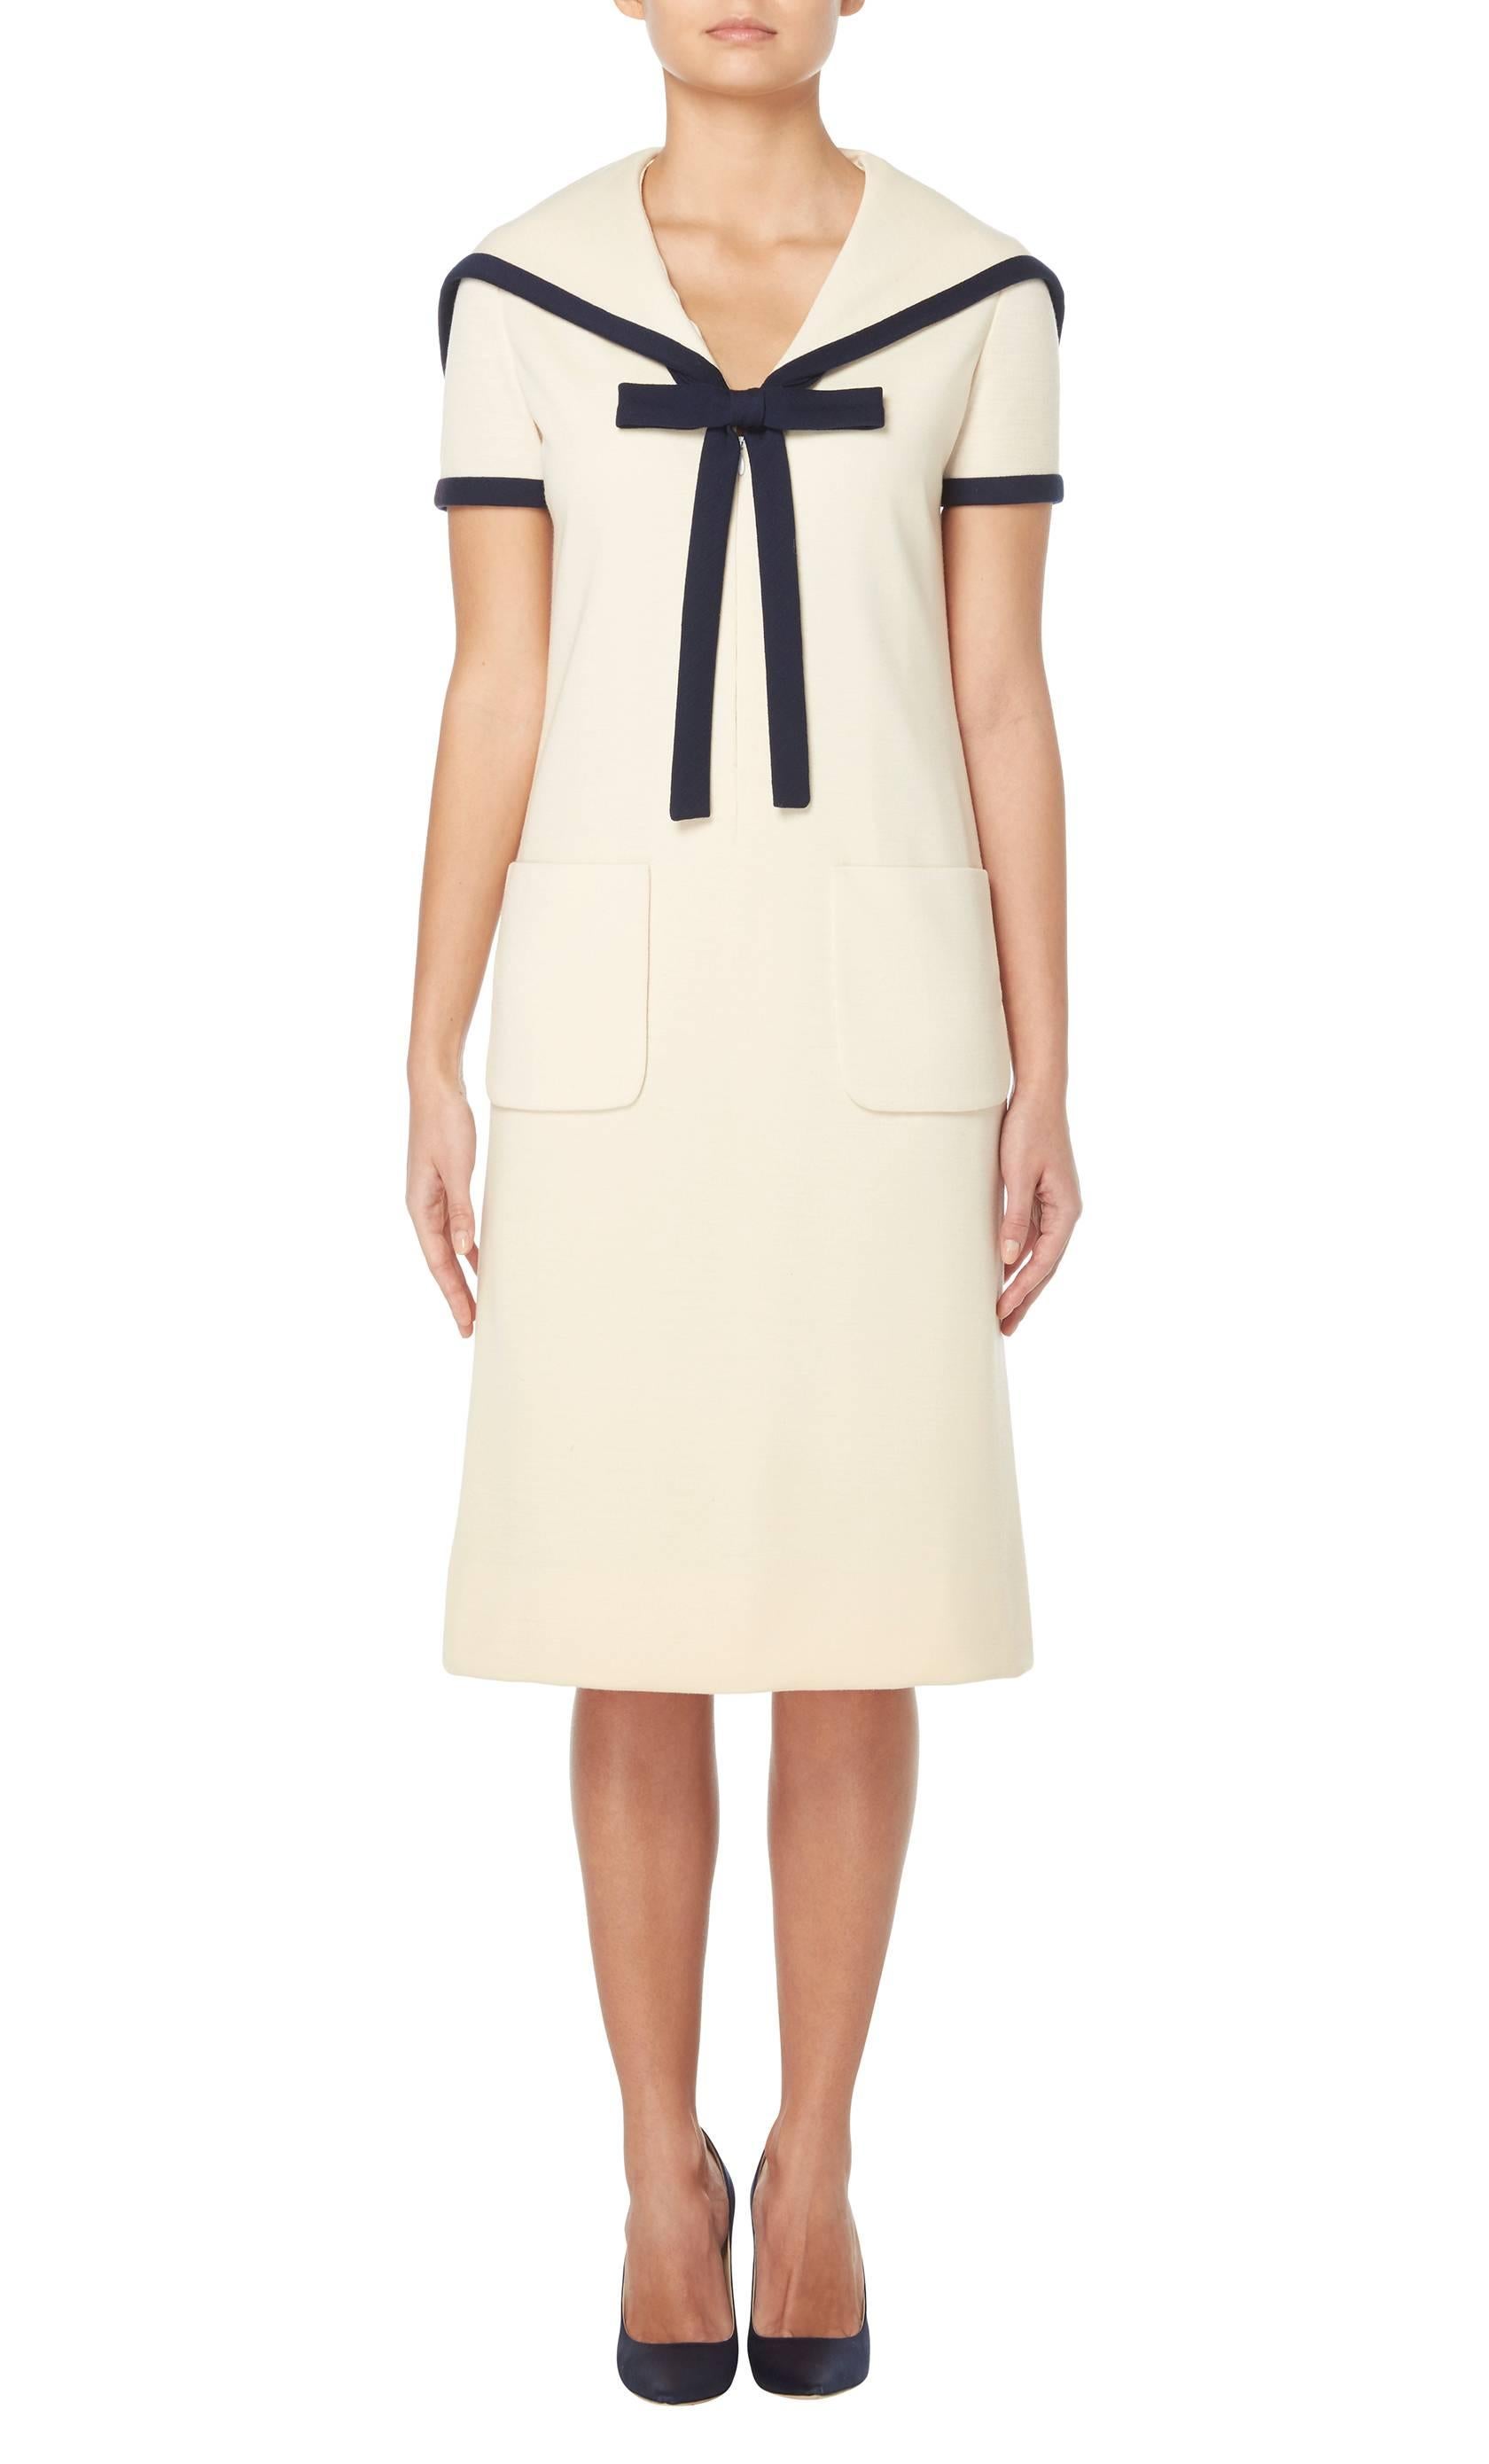 A fun, nautical-inspired piece, this dress by Bill Blass is great for daytime occasions. Constructed in ivory wool and featuring navy trim to the sailor collar and short sleeves, the dress has a bow detail on the neckline and stars embroidered at